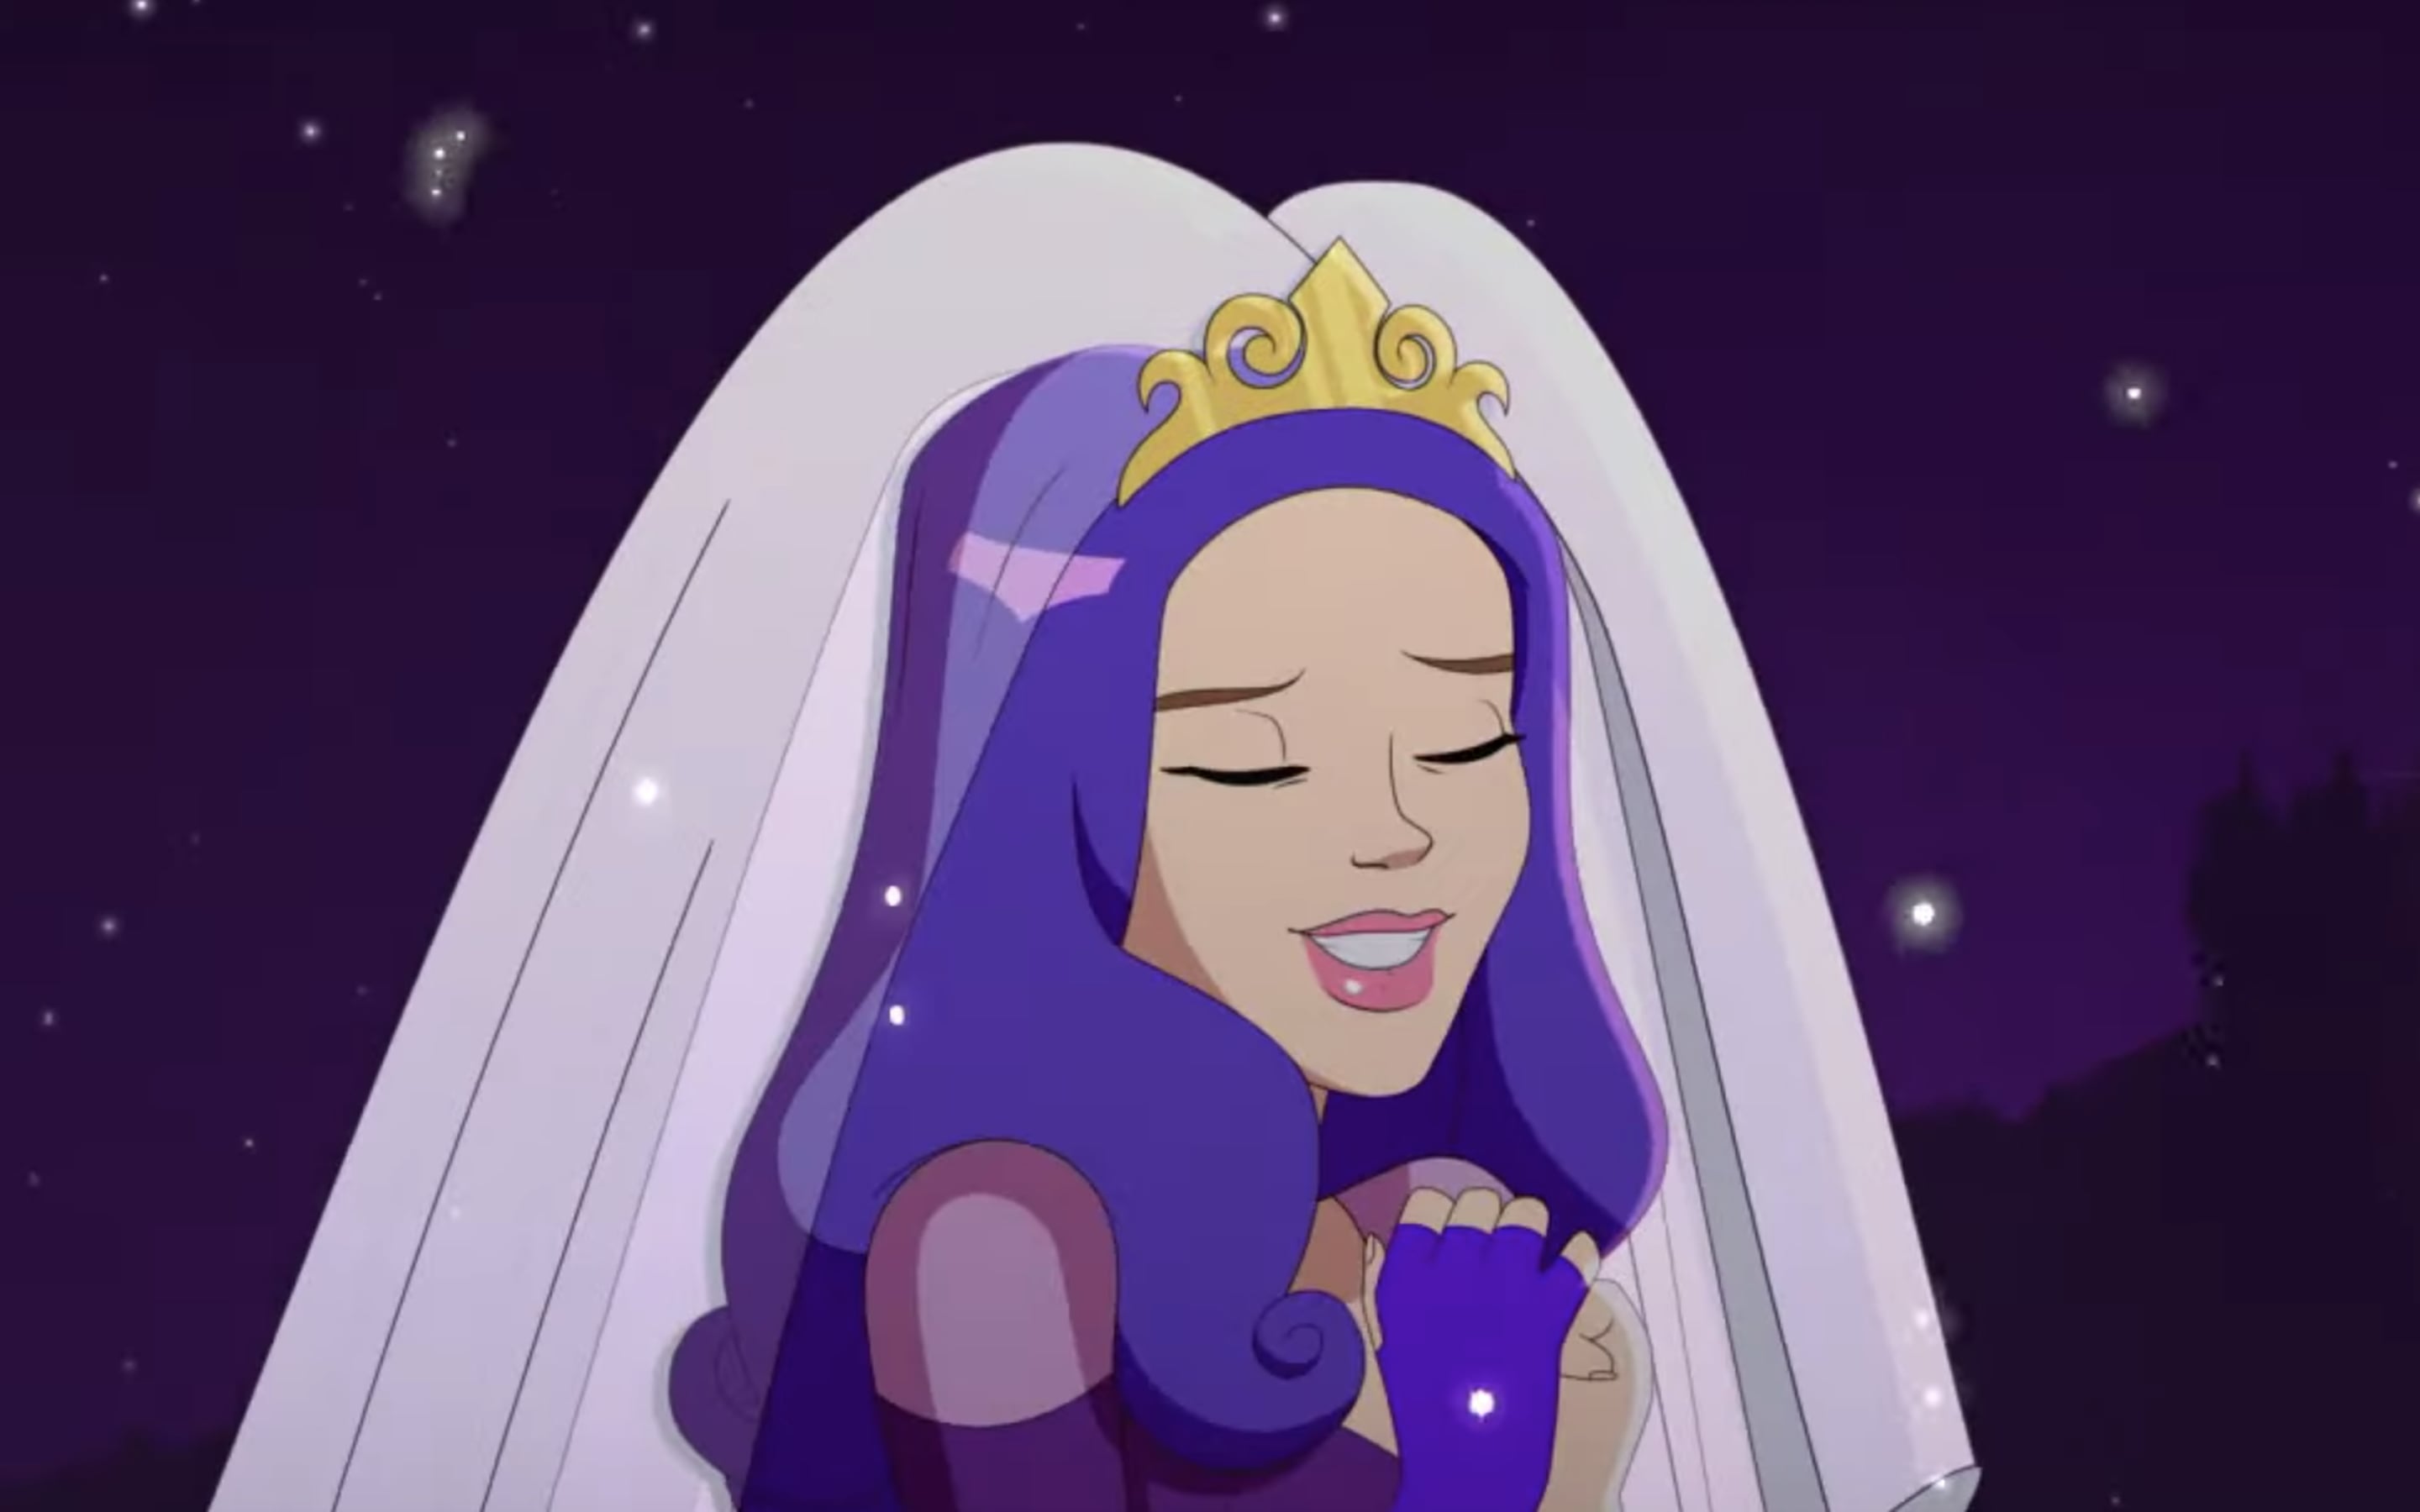 Descendants: The Royal Wedding” Animated Special Coming to Disney